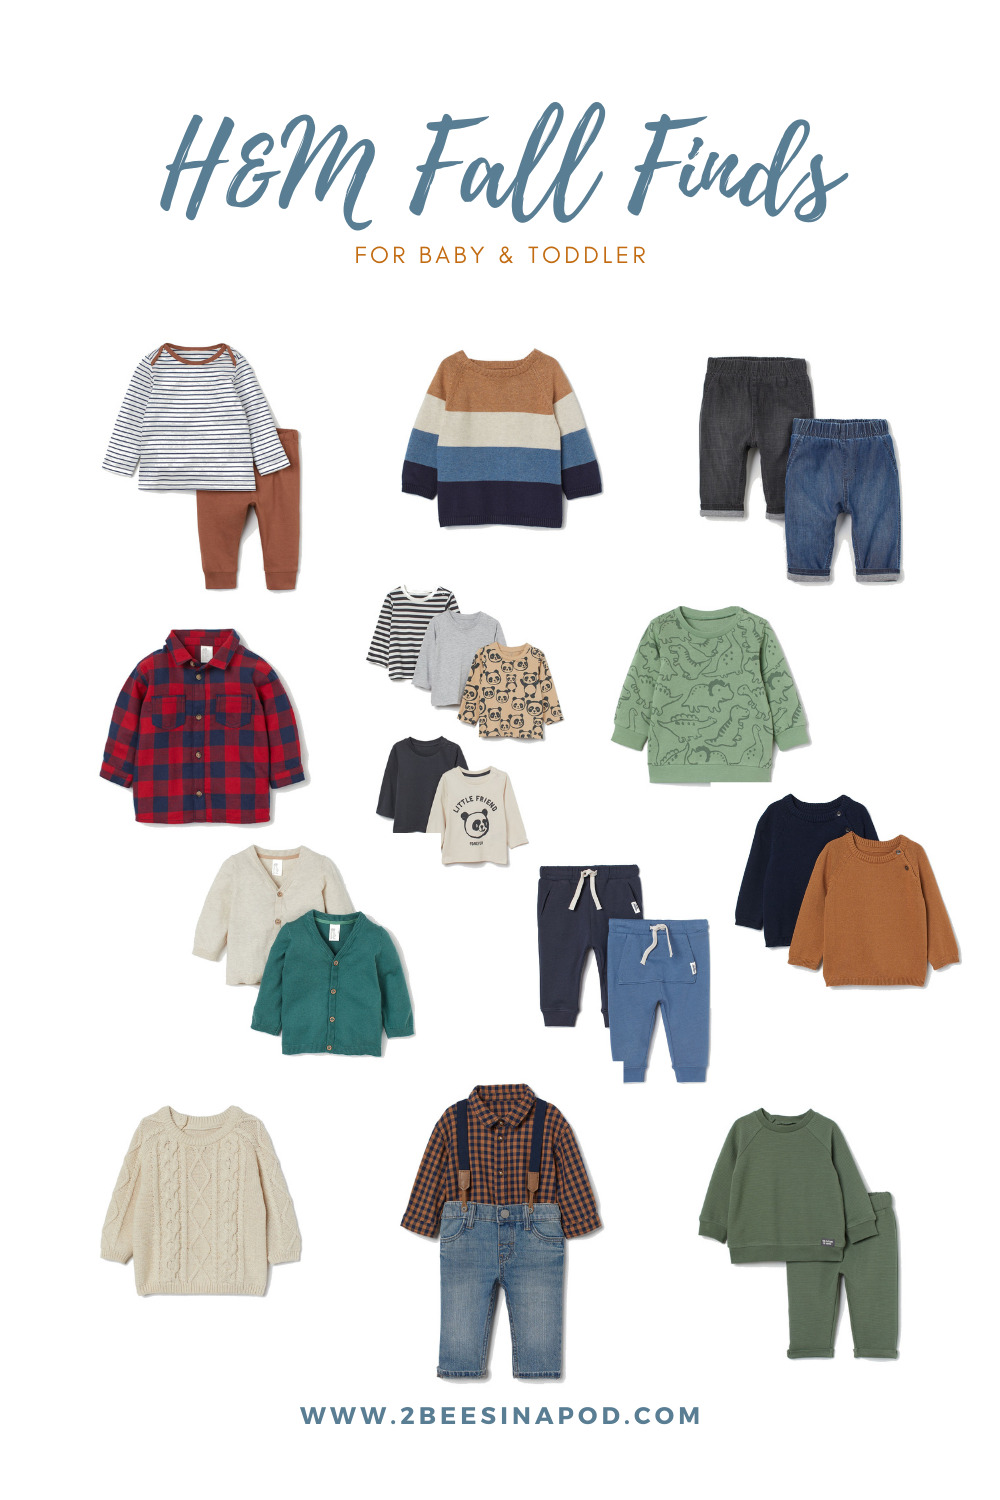 H&M Fall Finds – Baby & Toddler